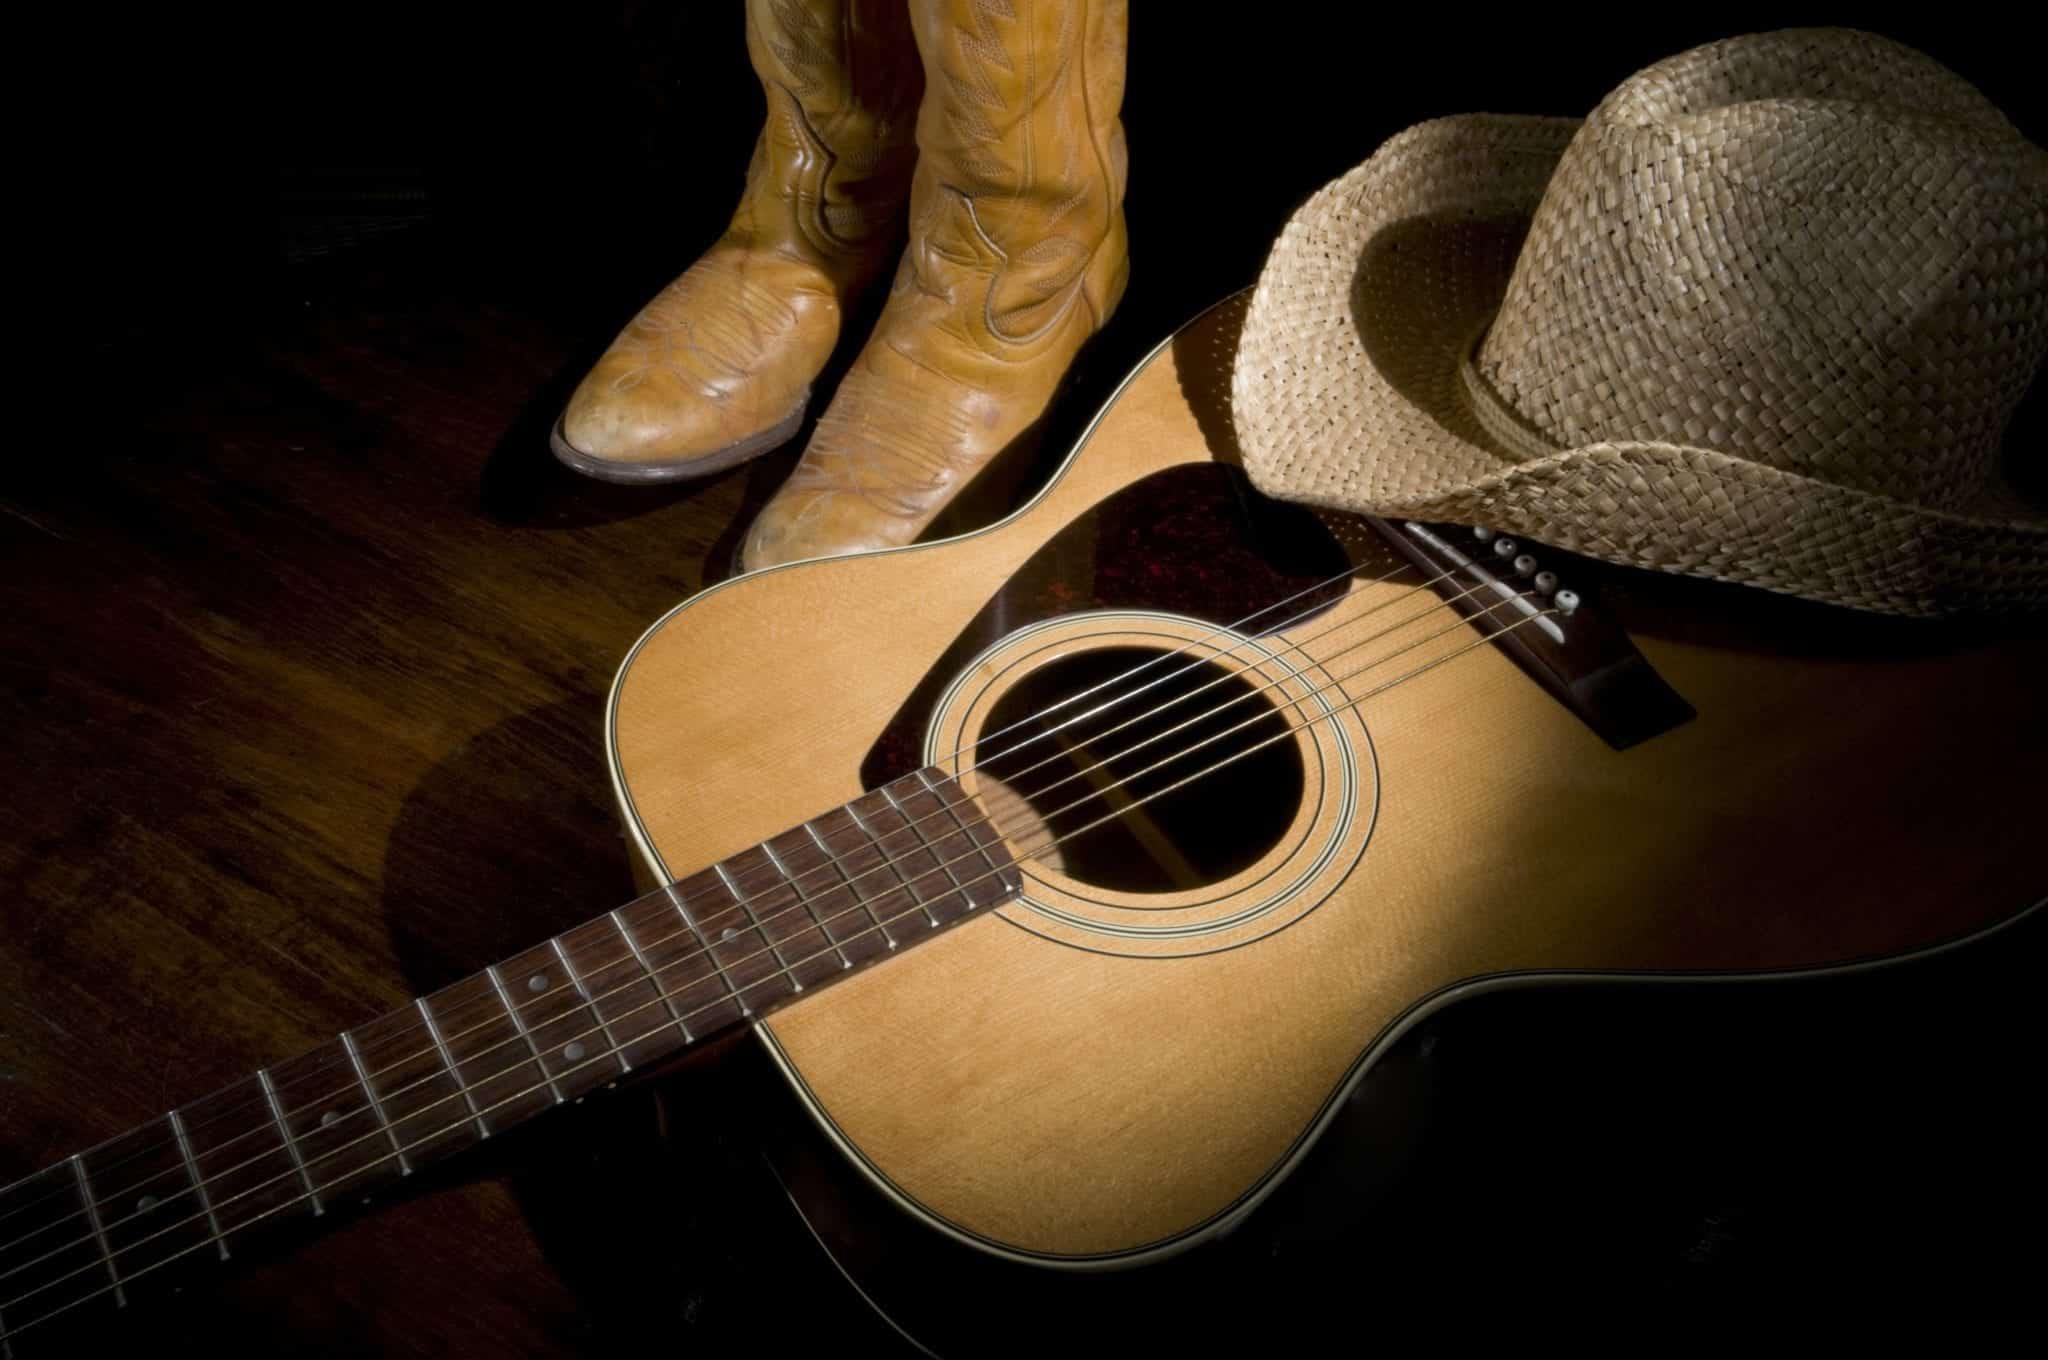 Country music cowboy hat, cowboy boots, and guitar